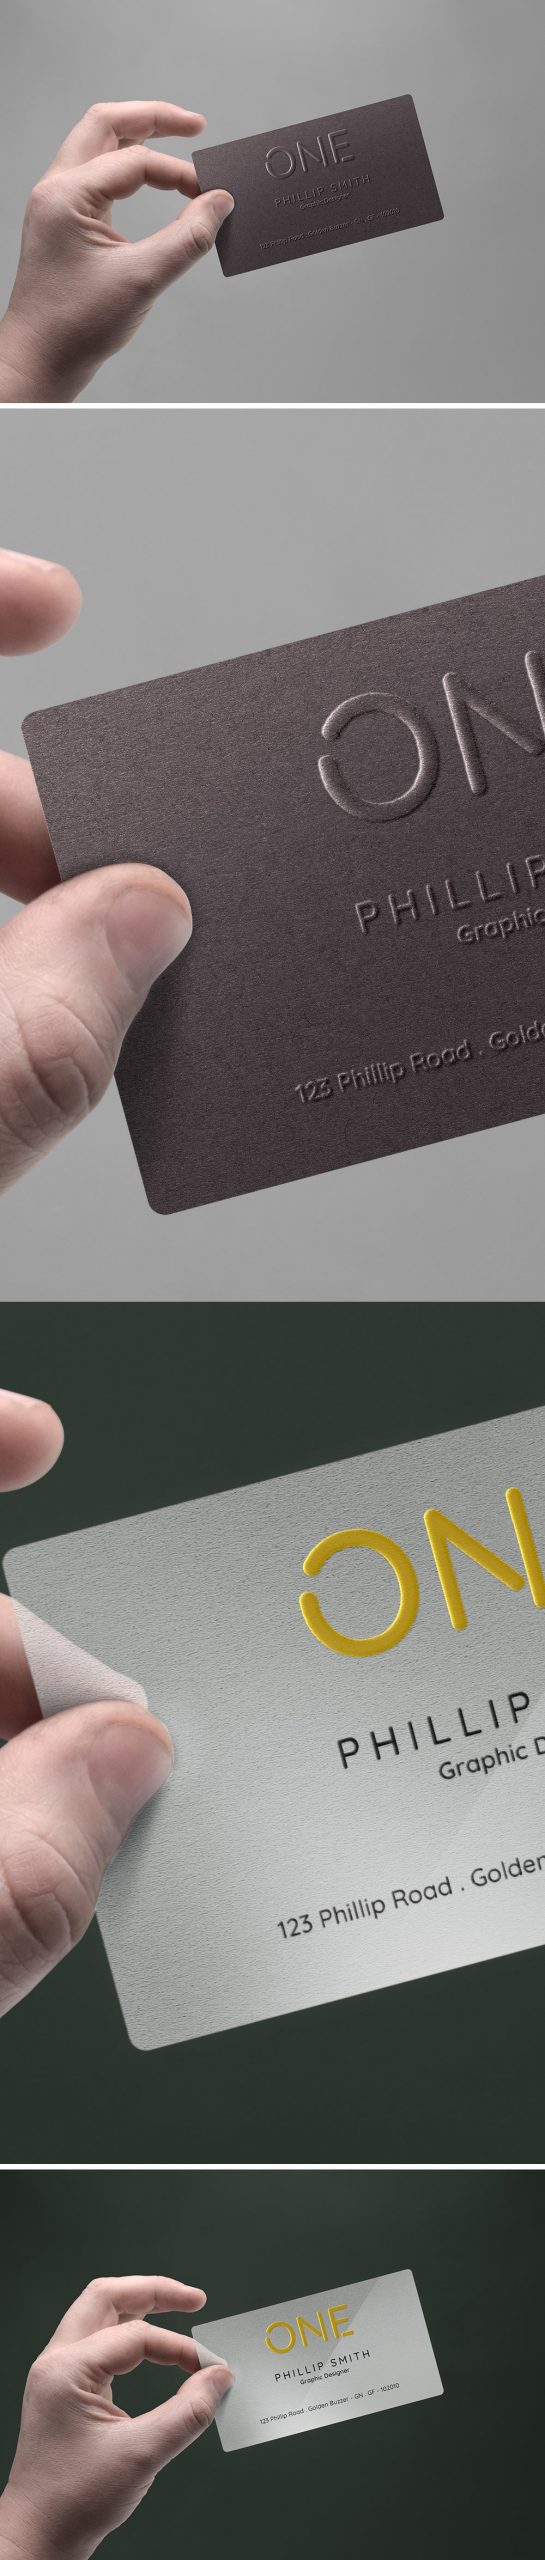 Realistic Business Card In Hand Mockup Free Download